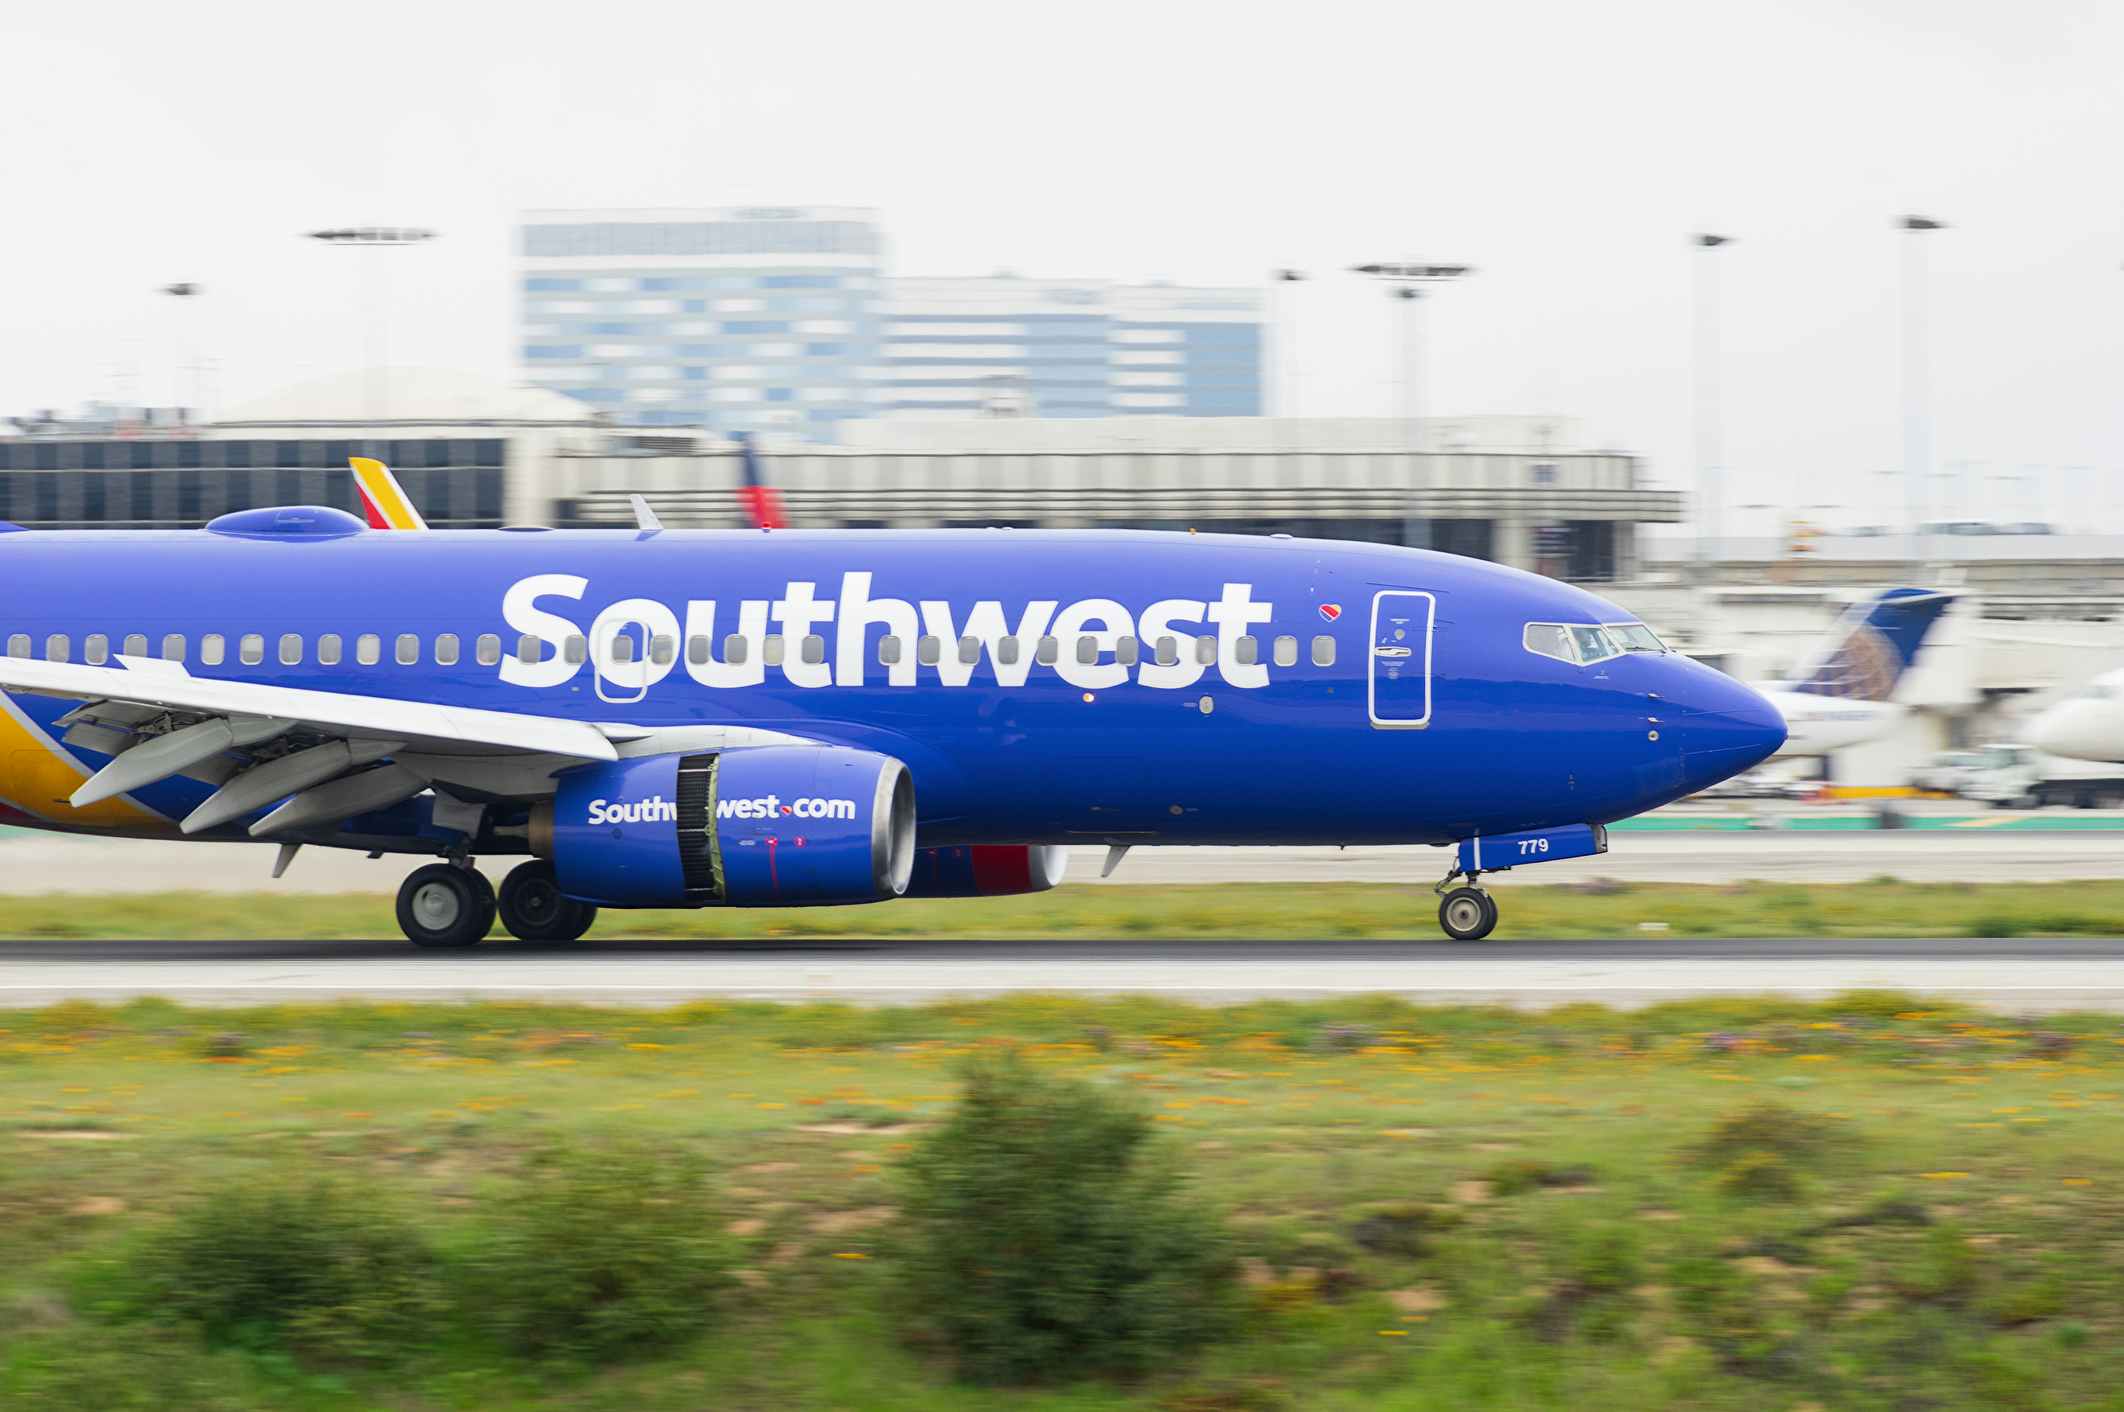 Southwest airlines plane